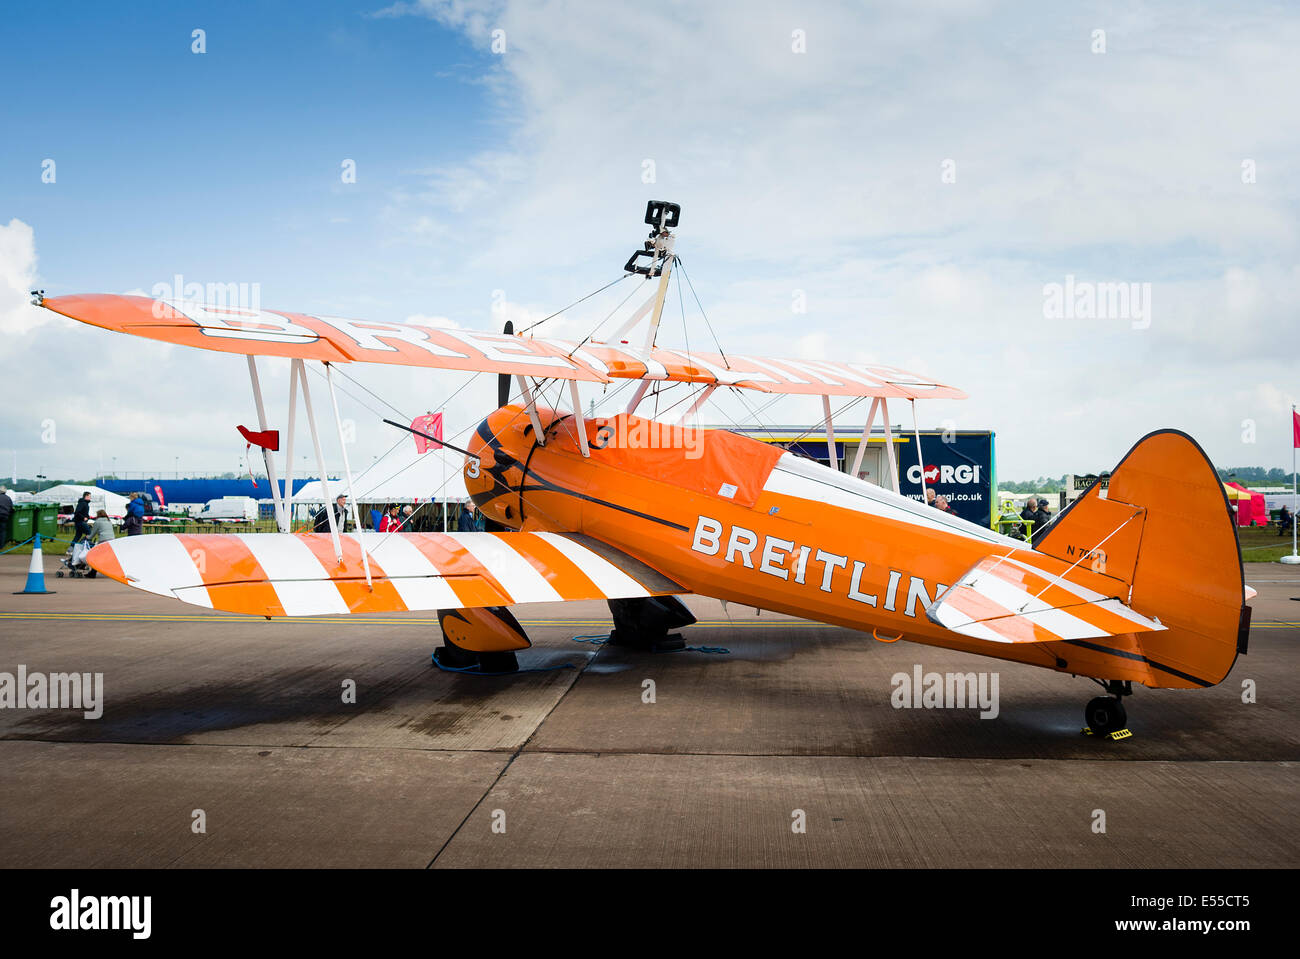 Brreitling Stearman biplance used for wing-walking flying events in UK Stock Photo